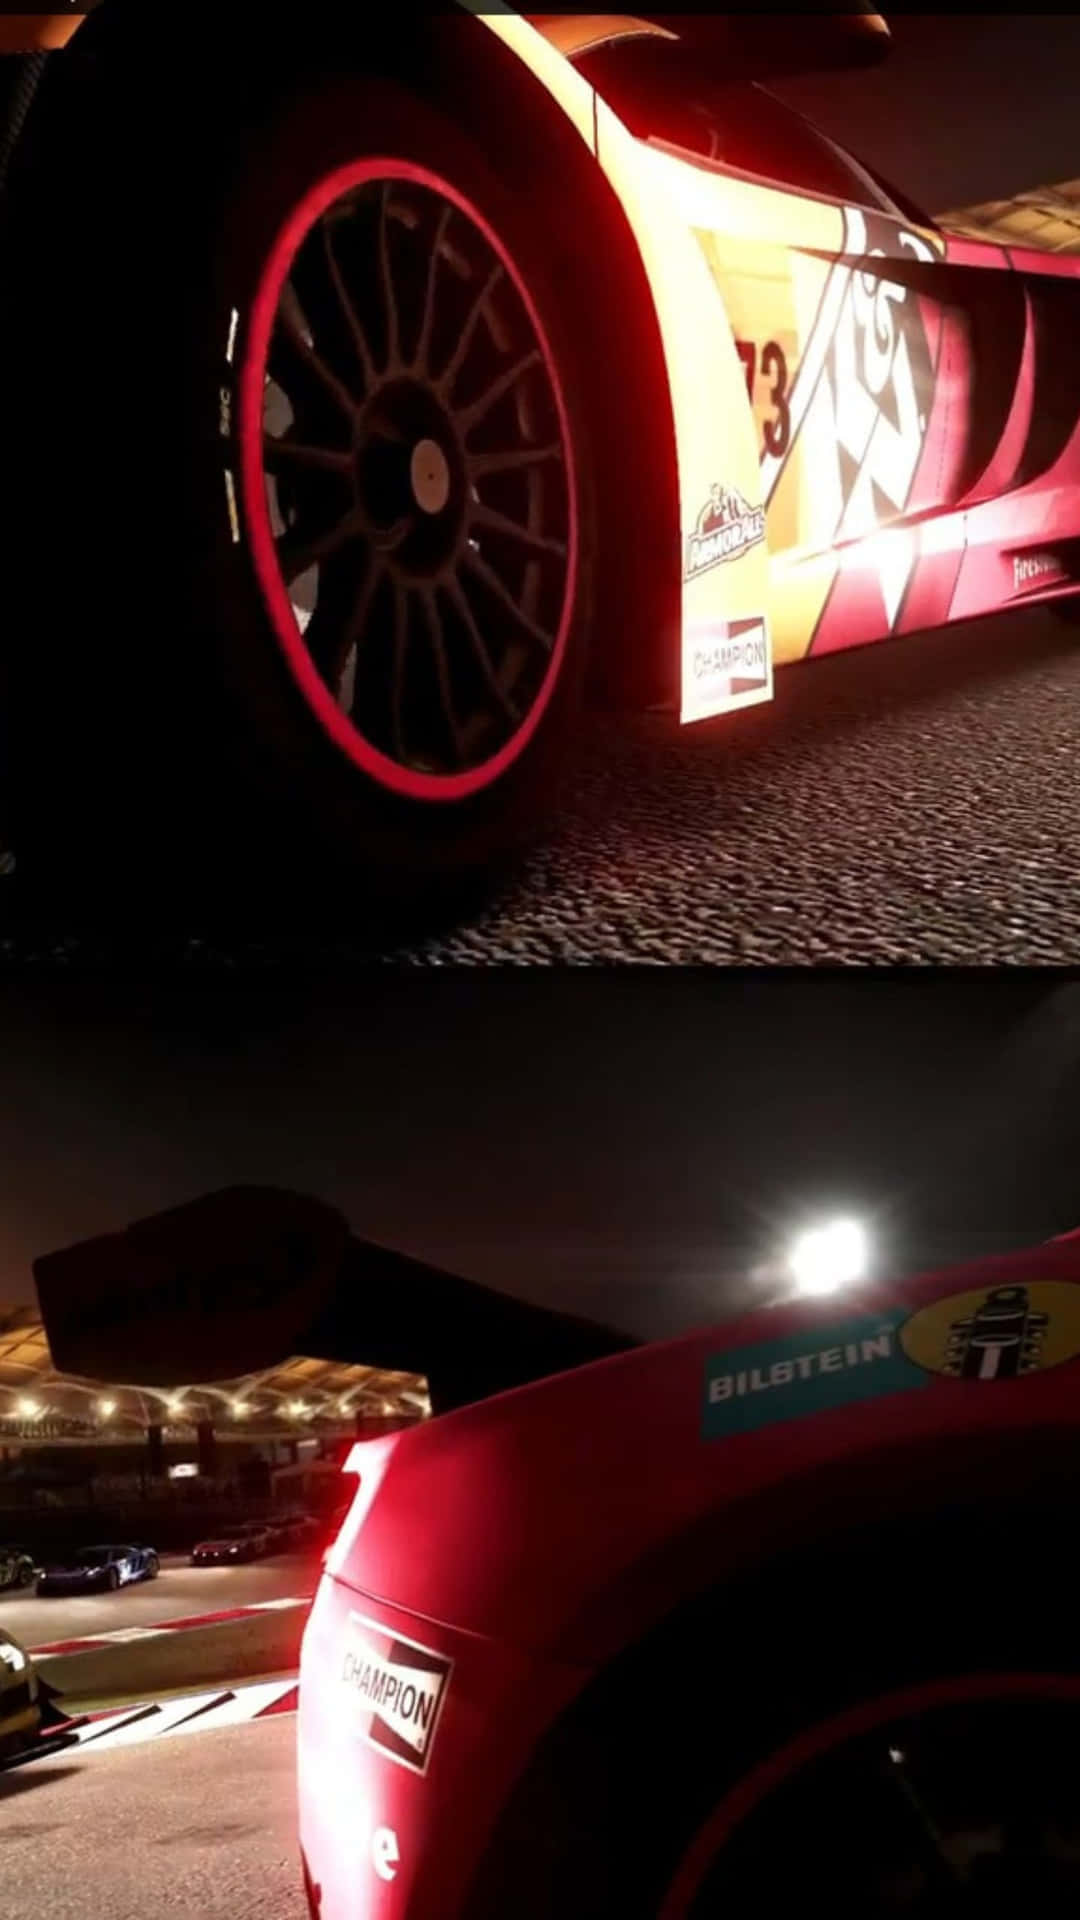 A Race Car Is Shown In Two Different Images